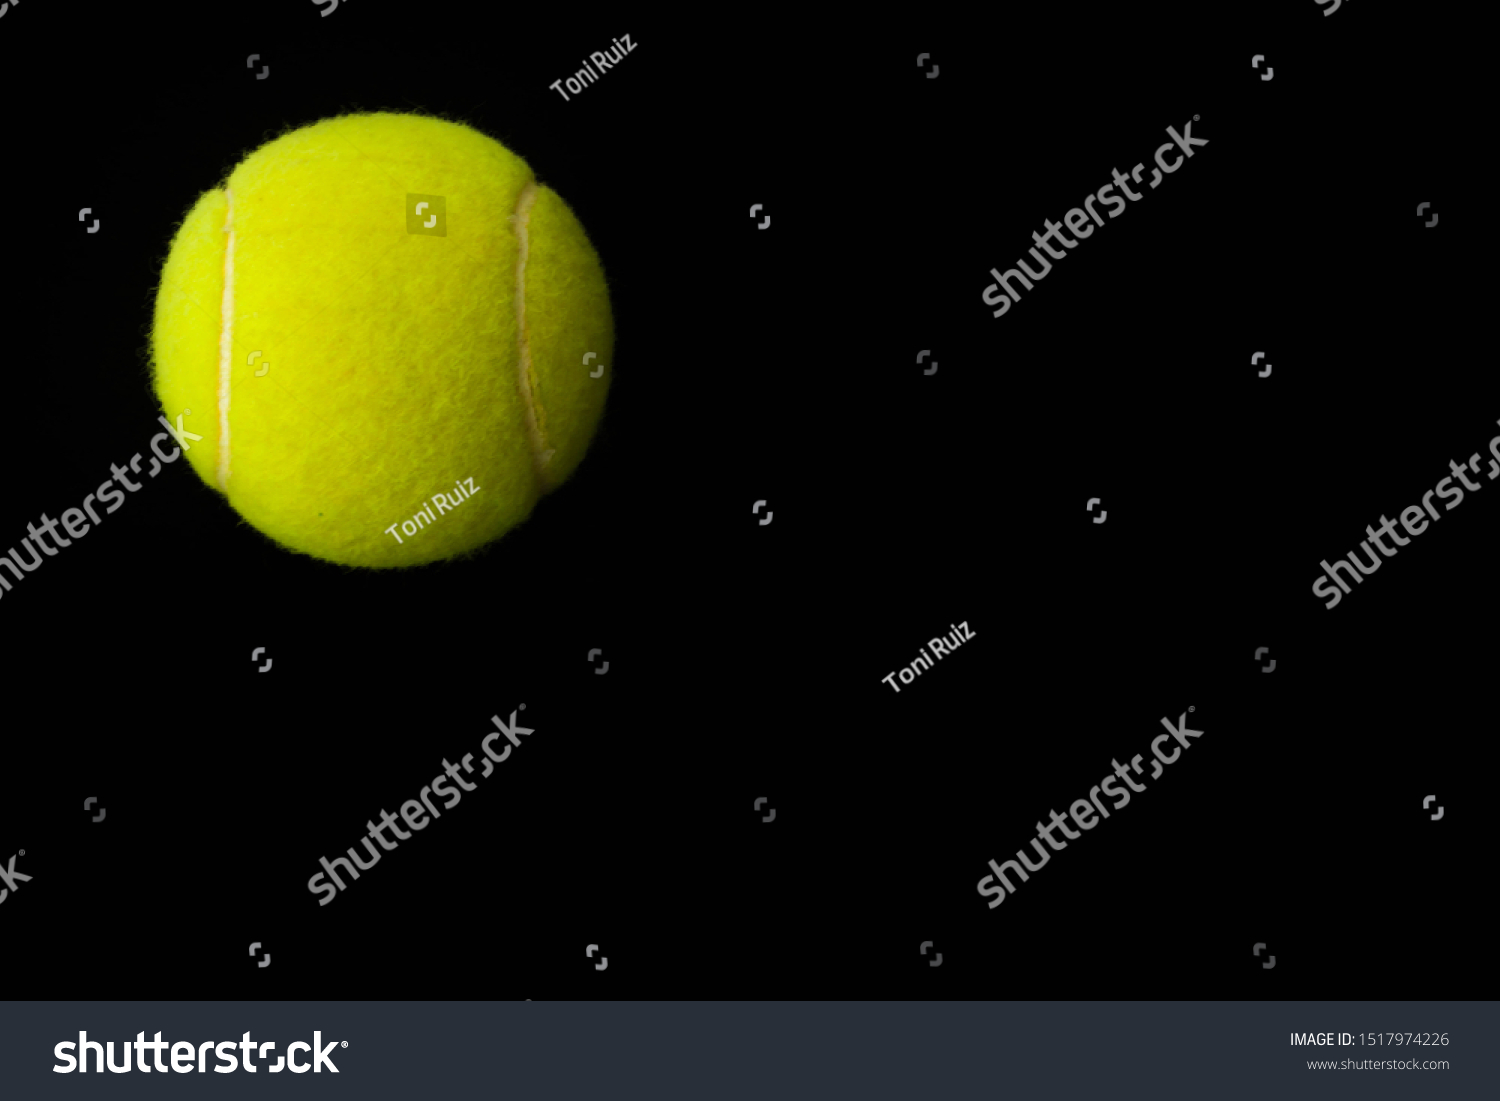 yellow tennis ball on a black background #1517974226